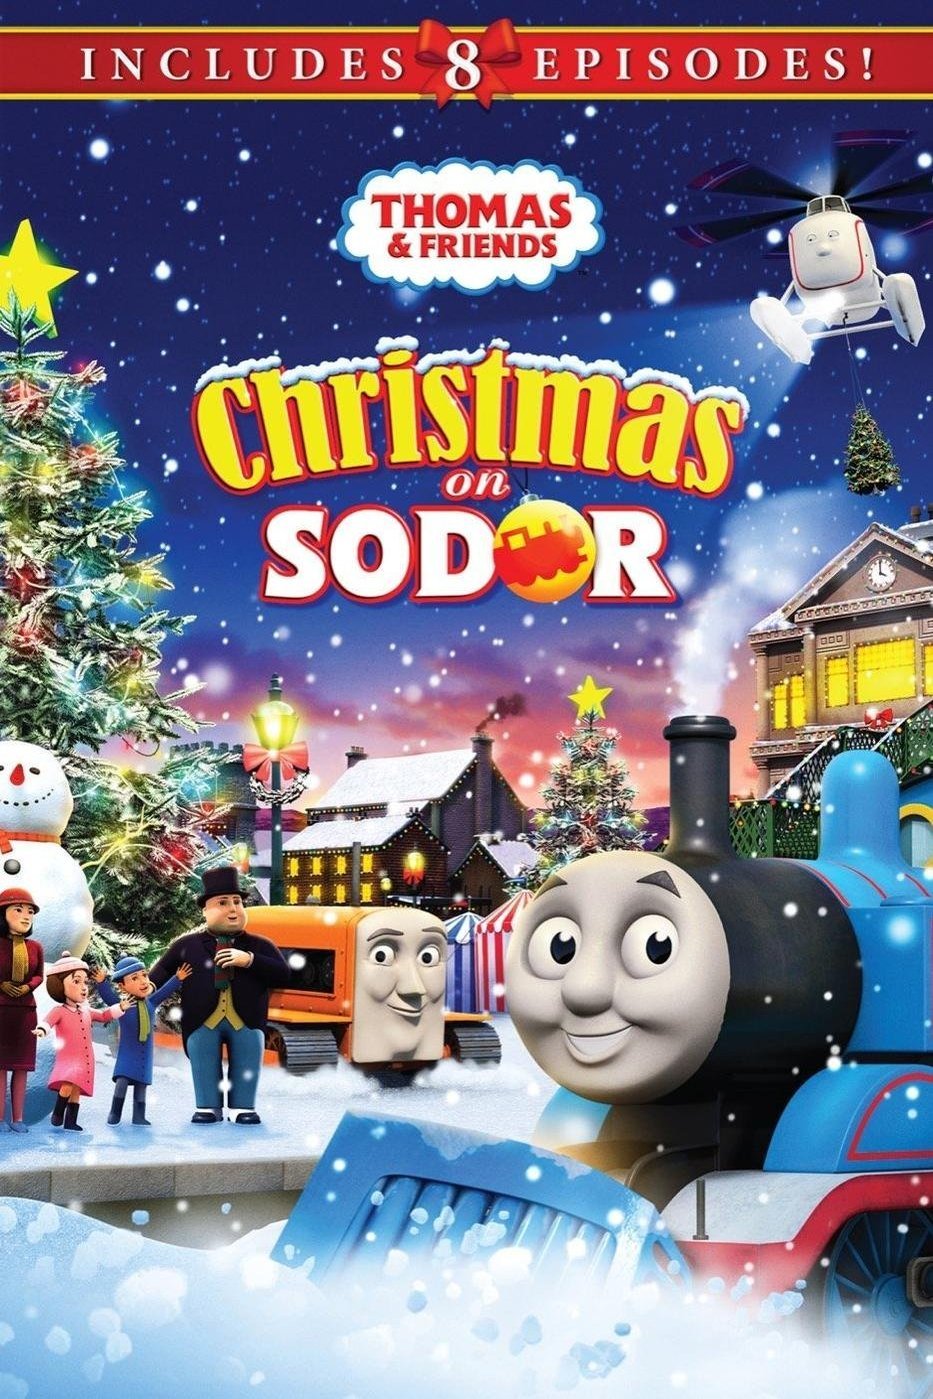 Poster of the movie Thomas & Friends: Christmas on Sodor